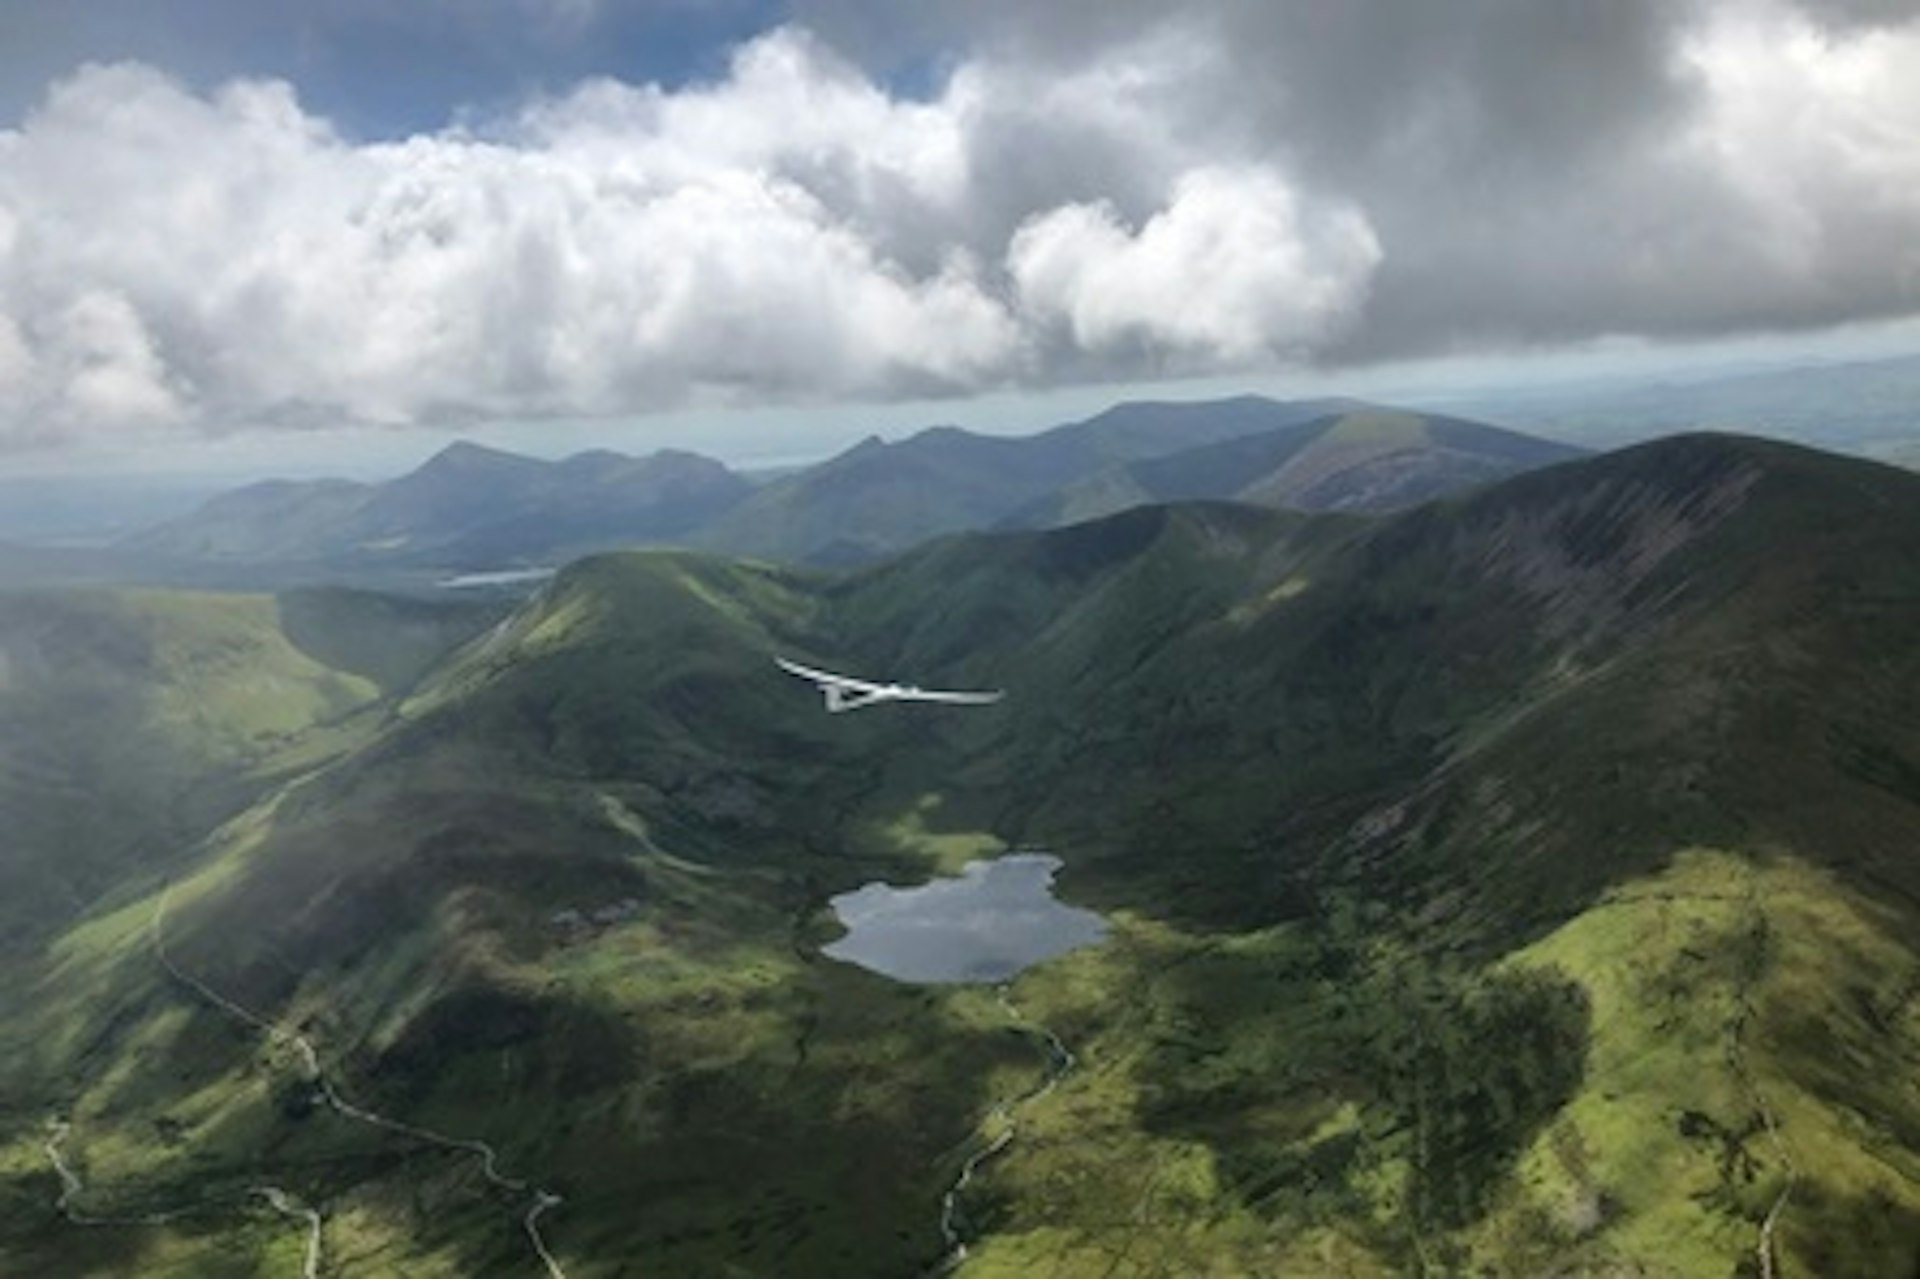 Motor Glider Flight of the Snowdonia Mountains and Lakes 2